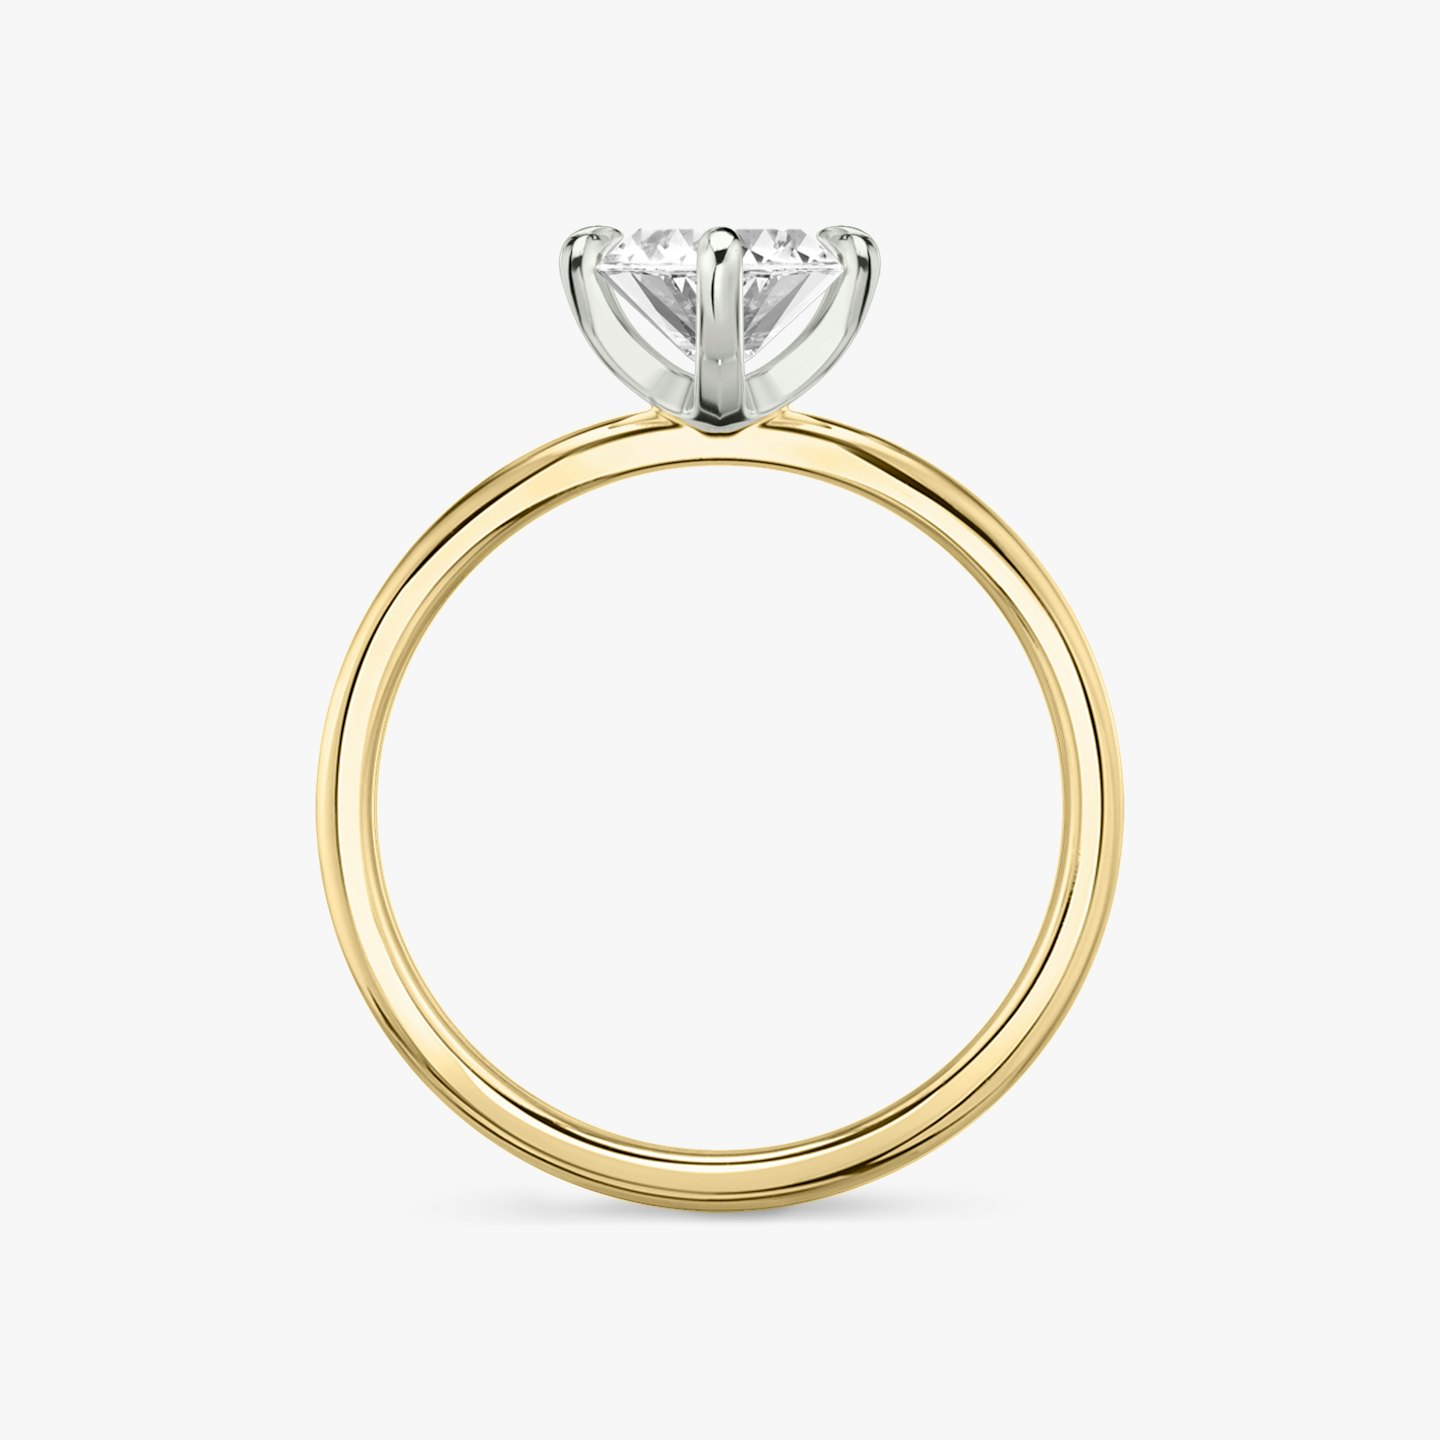 Closeup image of The Classic Two Tone Ring